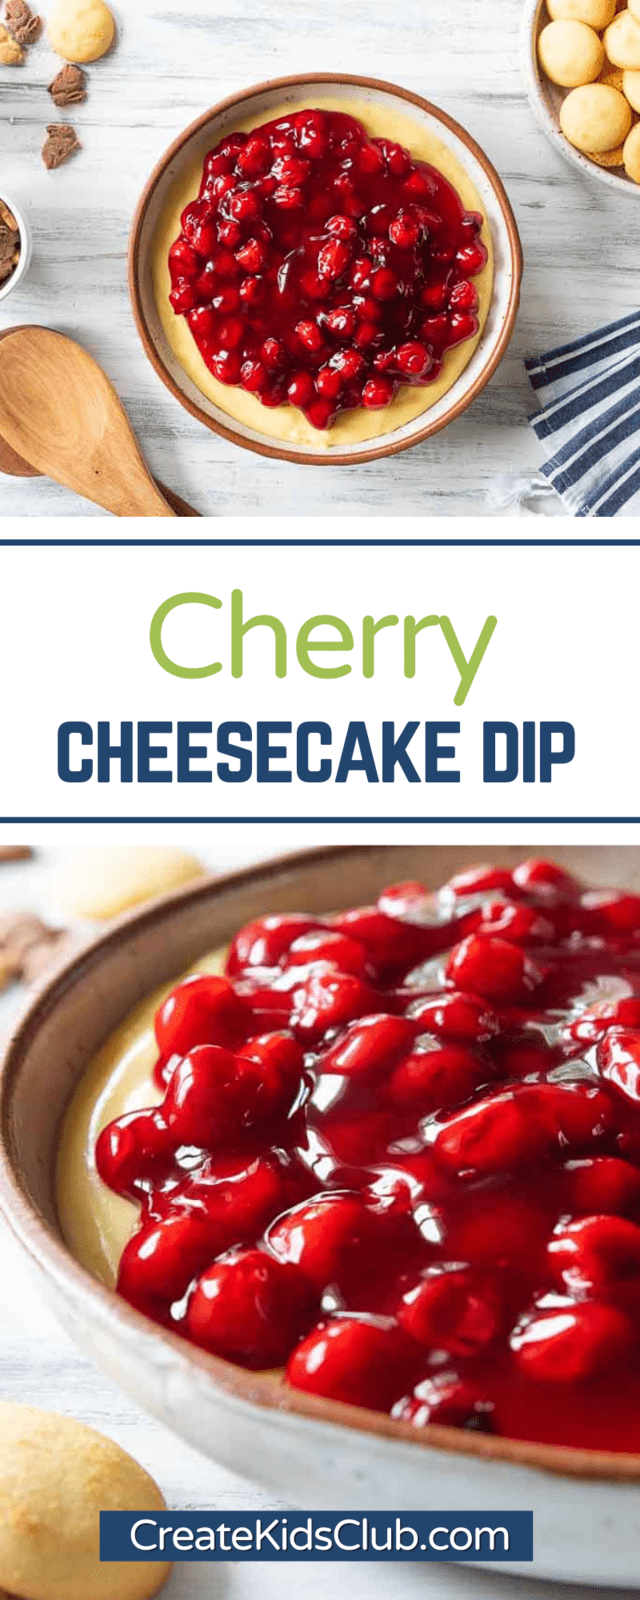 two Pinterest images of cherry cheesecake dip